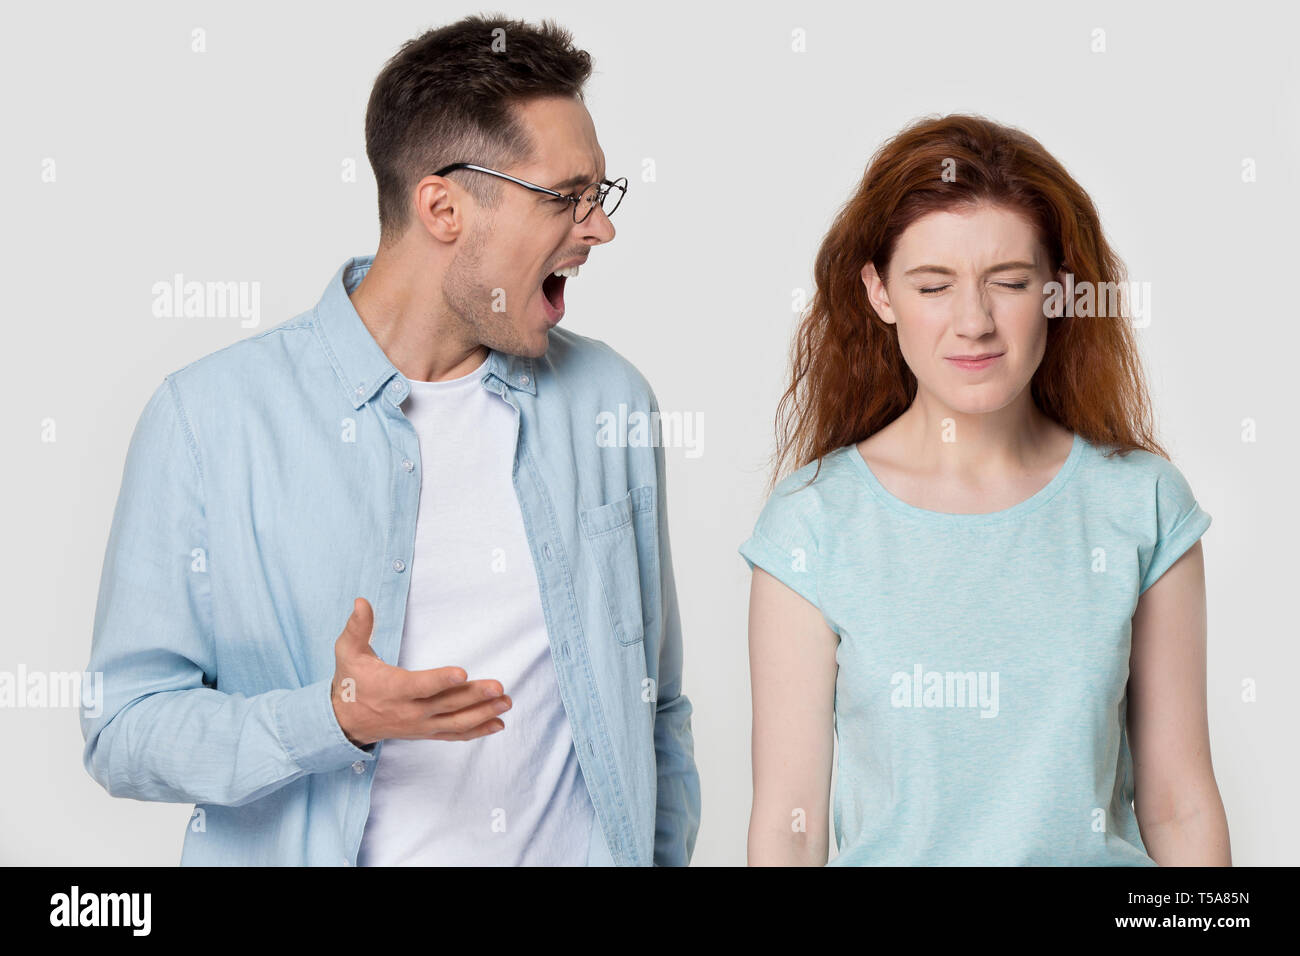 Furious man argue with girlfriend shouting at her Stock Photo